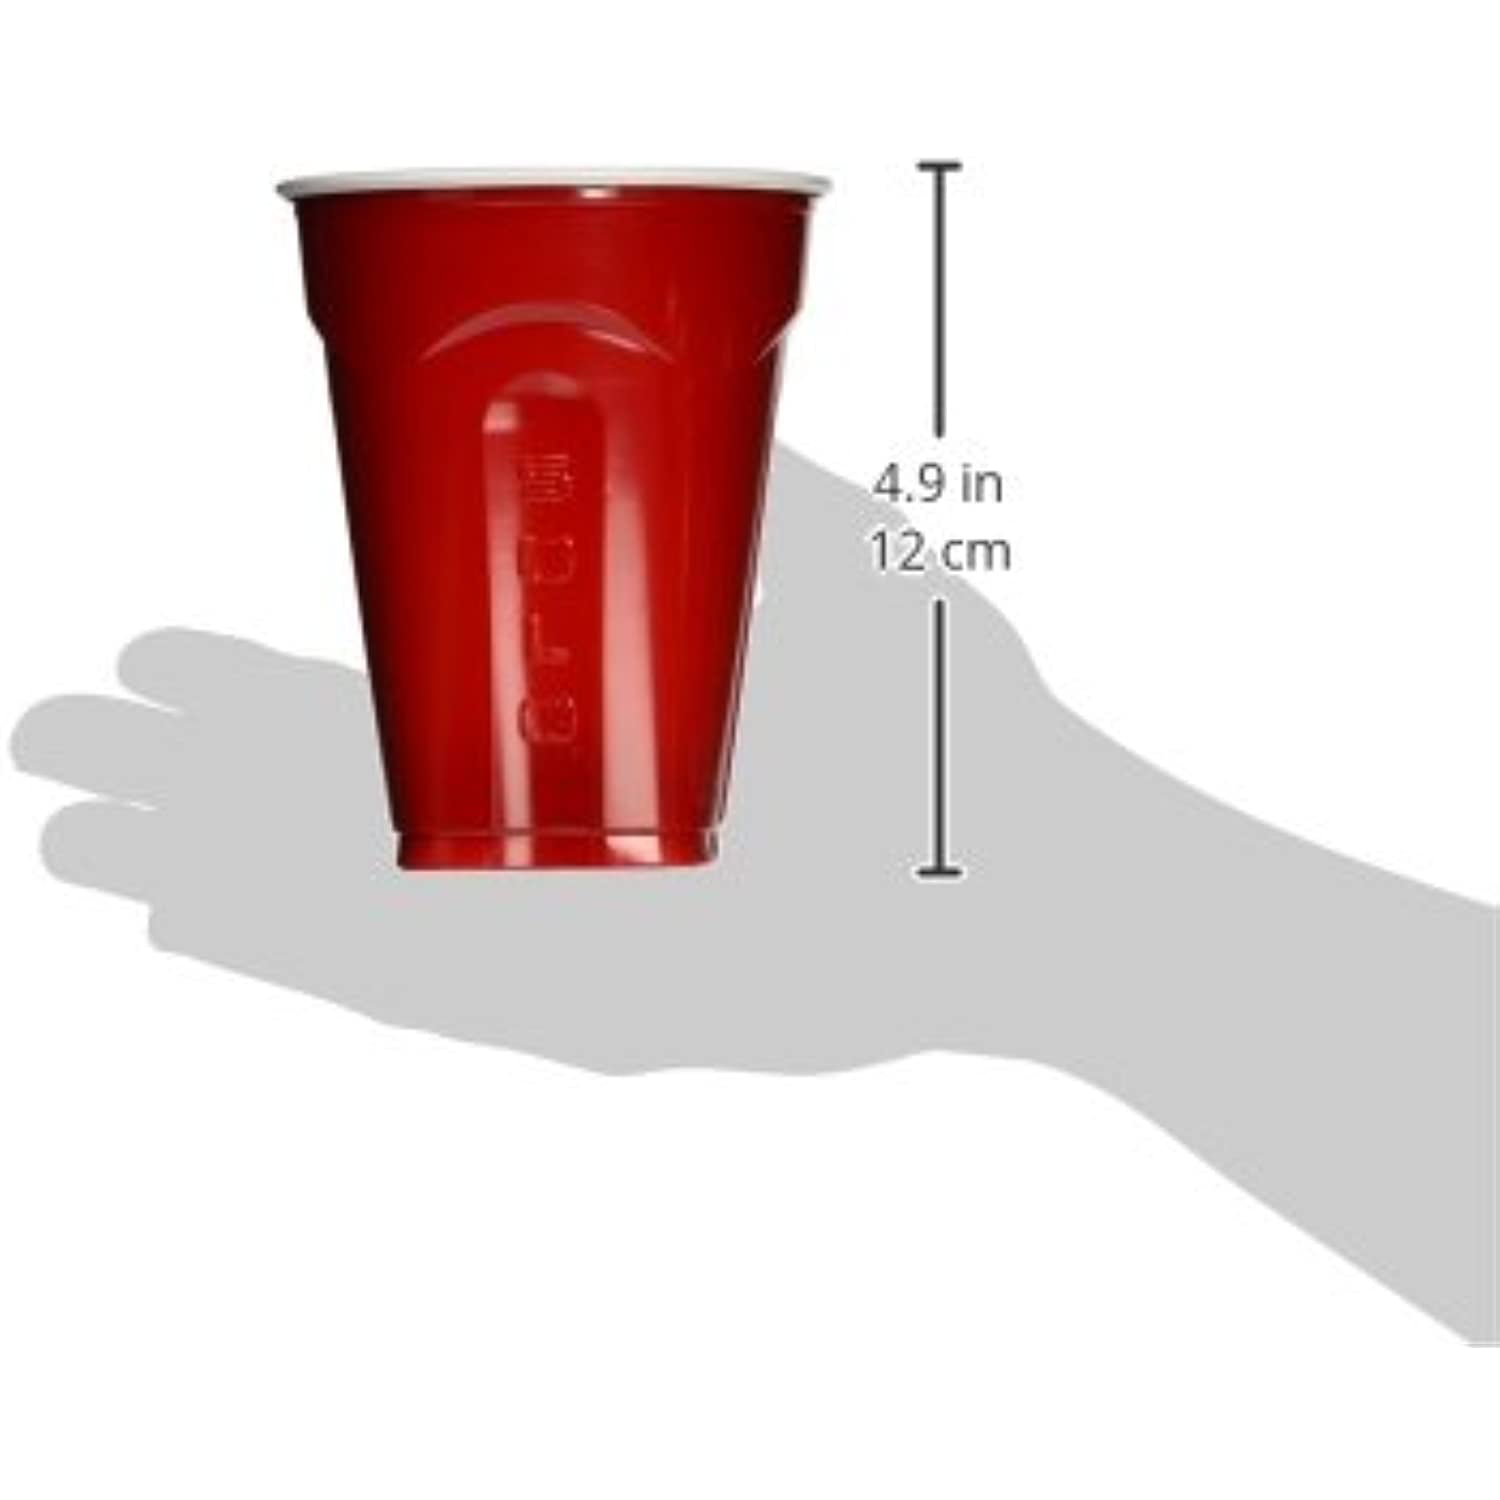 6 Things You Never Knew About the Red Solo Cup